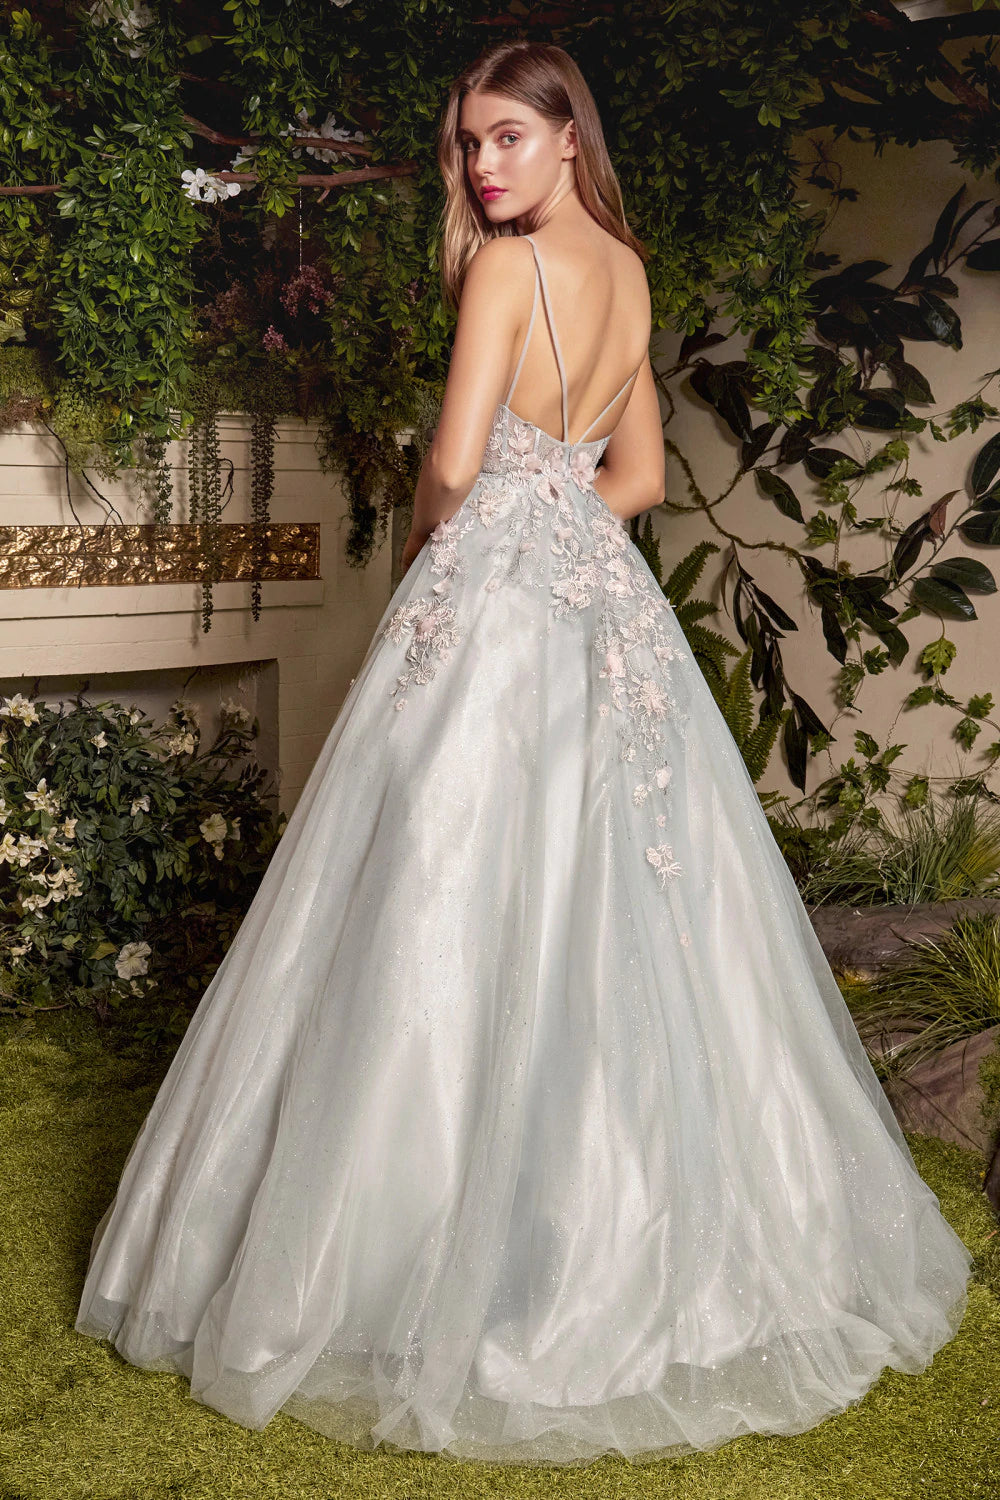 Andrea & Leo TIANA A1040 Long Shimmer A Line Ballgown 3D Lace Formal Dress Sheer Gown Andrea & Leo A1040 this gown features blush 3D organza florals appliqués over sage embroidery on a sheer corset bodice. The A-line silhouette accentuates the wearer's waist, and the ballgown skirt truly brings forth the fairytale aesthetic. Soft, romantic, and ethereal, this ballgown is reminiscent of forgotten gardens.  Available Sizes: 4-14  Available Colors: Sage